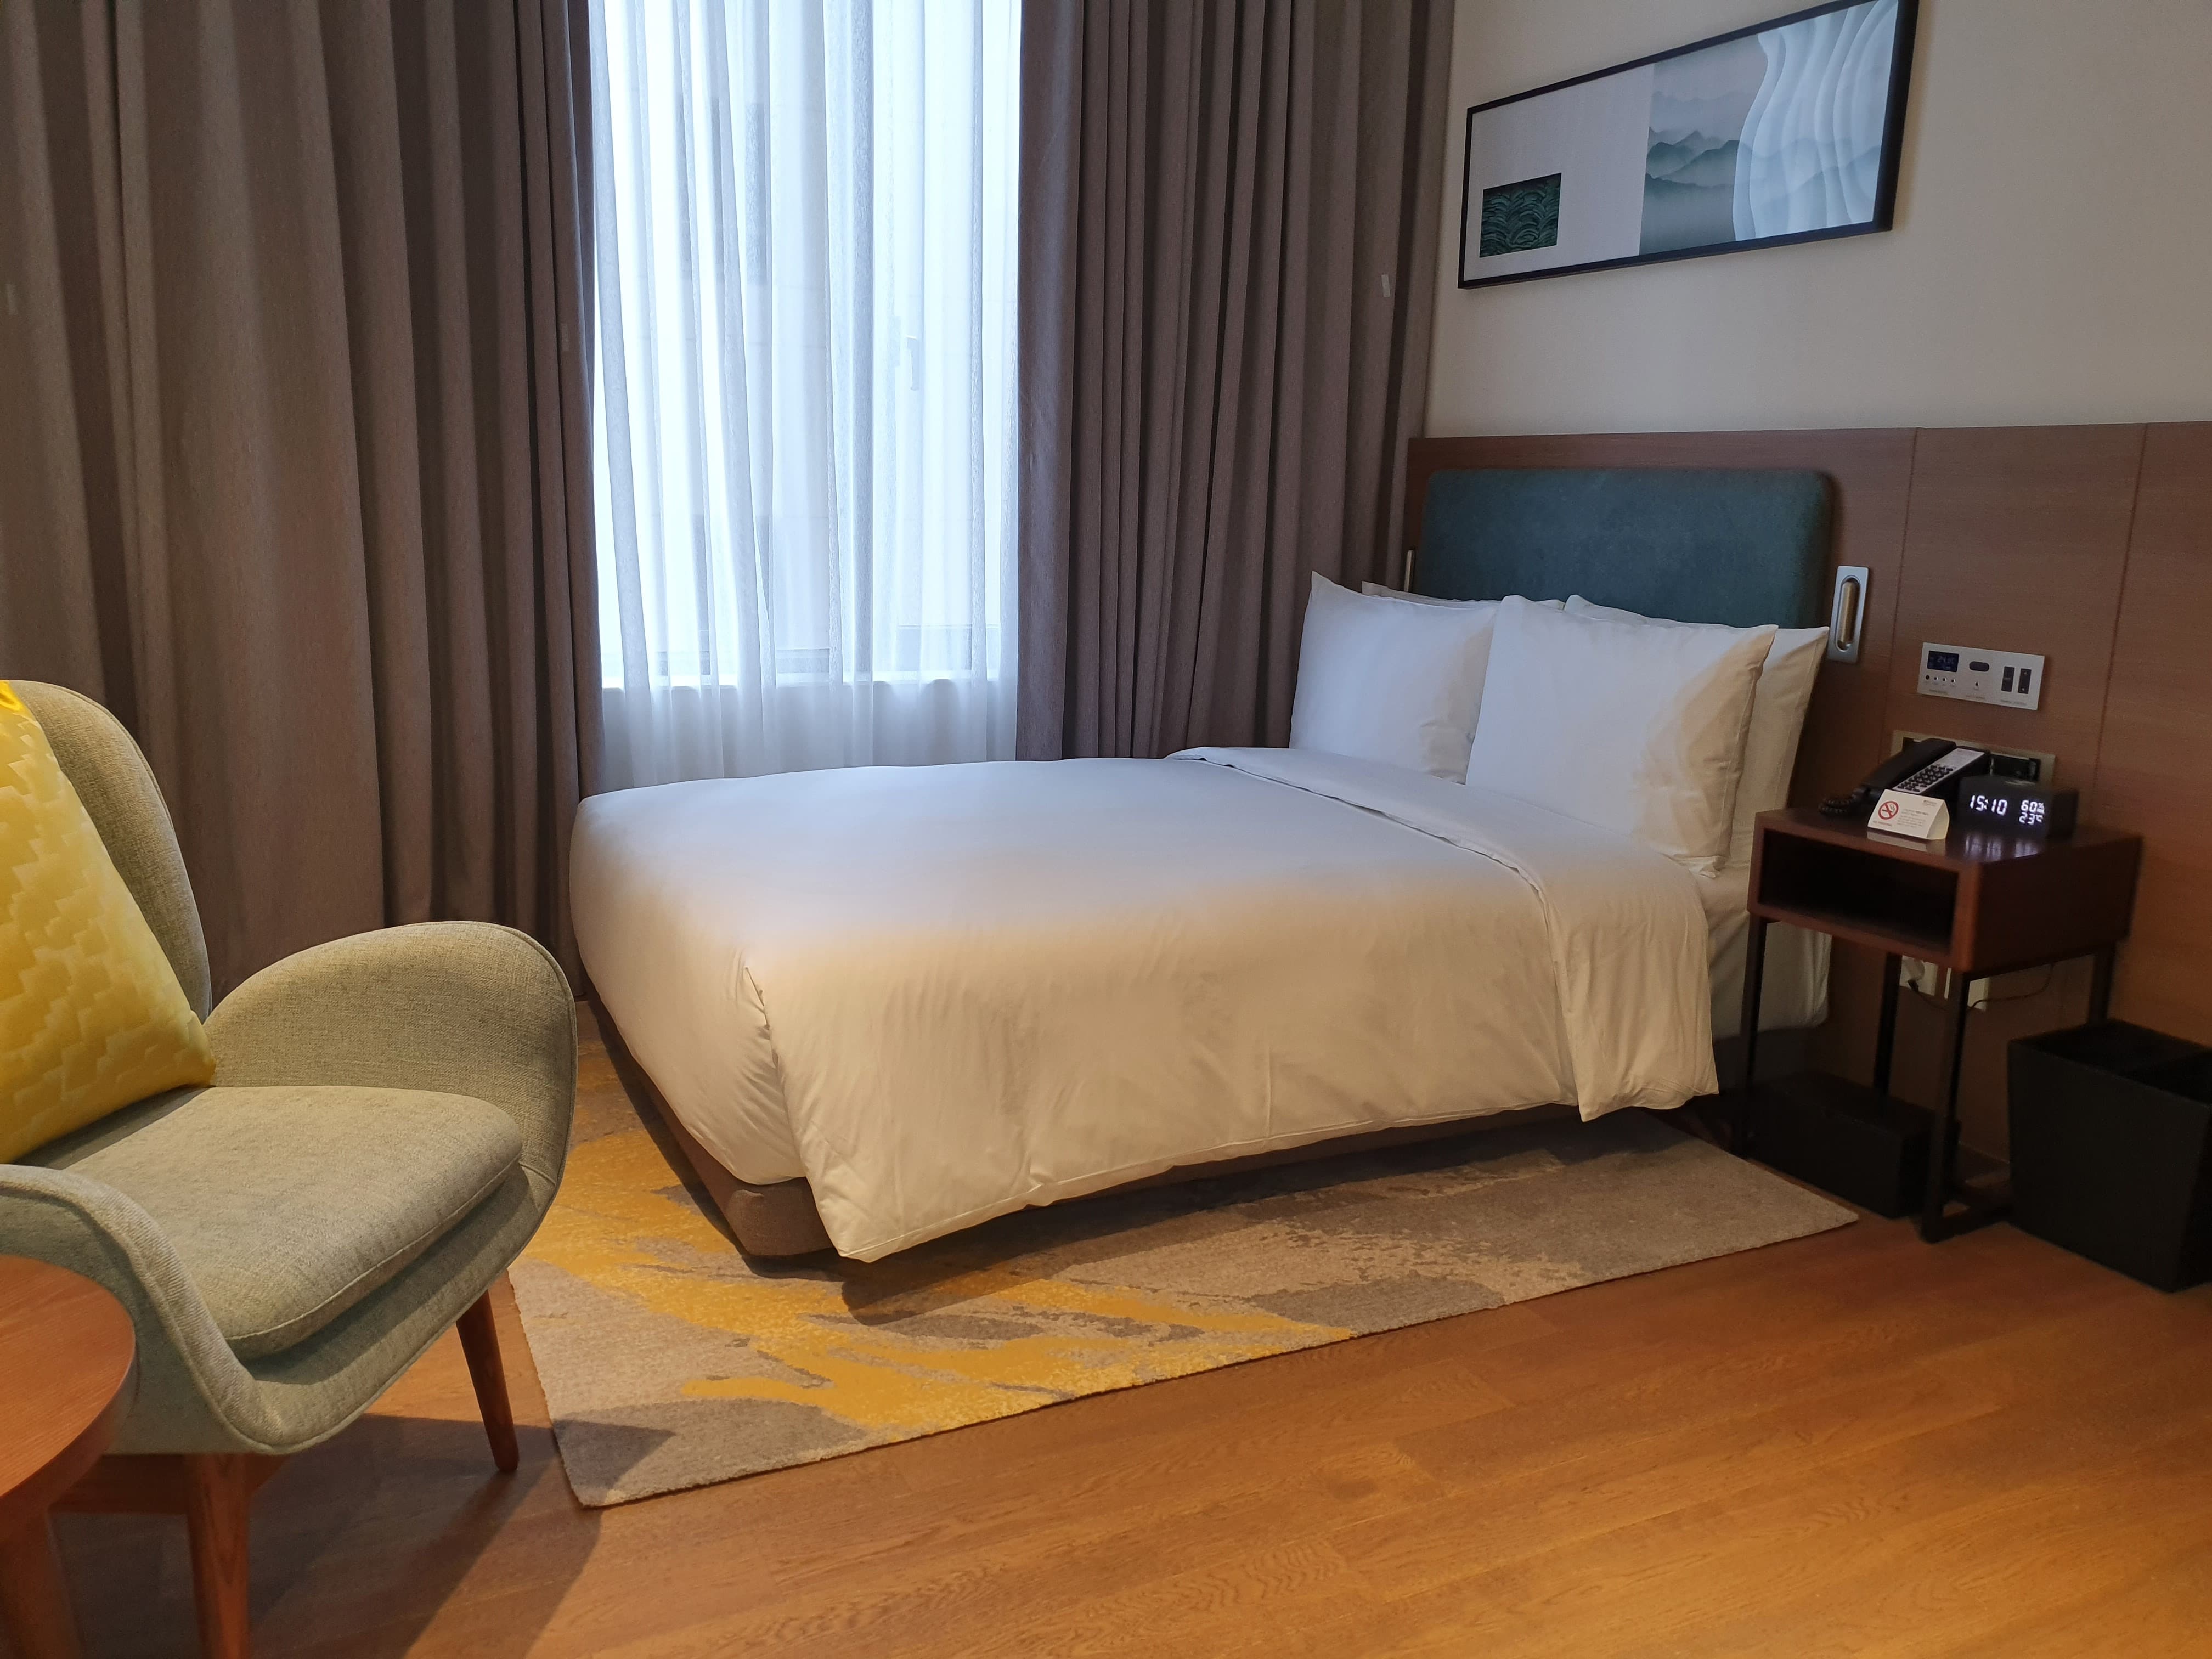 Accessible guestroom0 : Cozy hotel romm with a bed and a single sofa